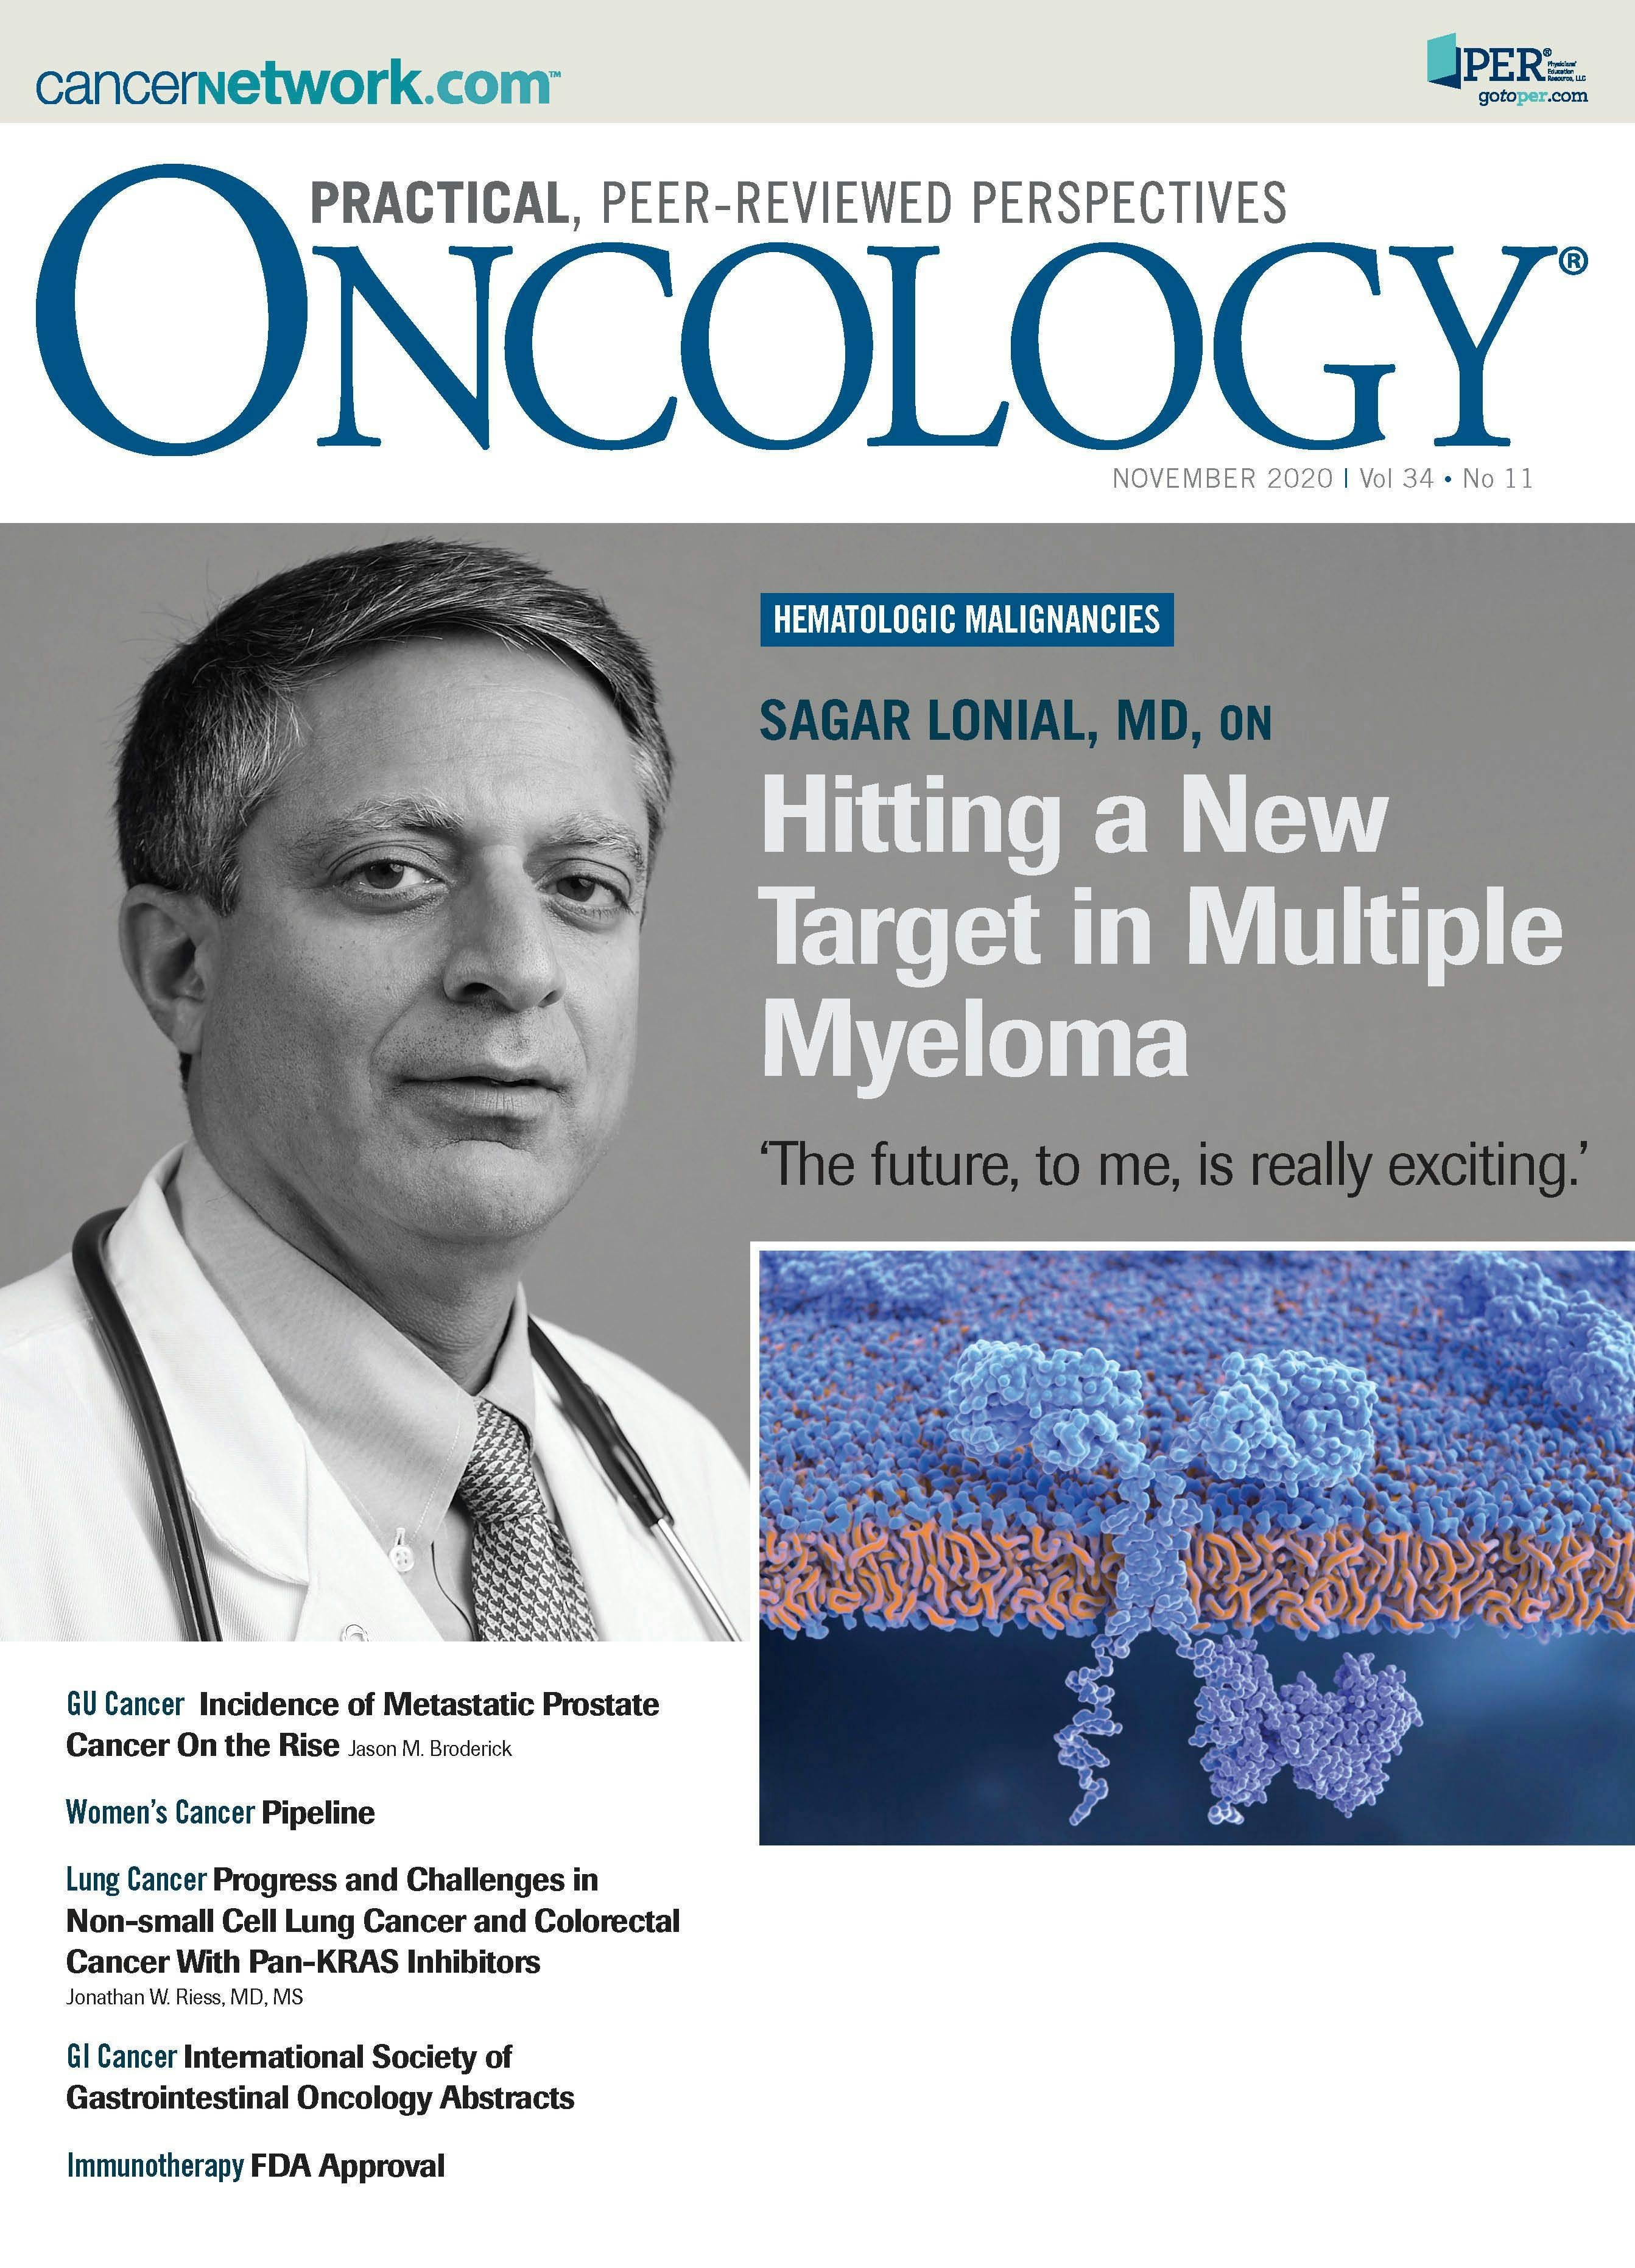 ONCOLOGY Vol 34 Issue 11